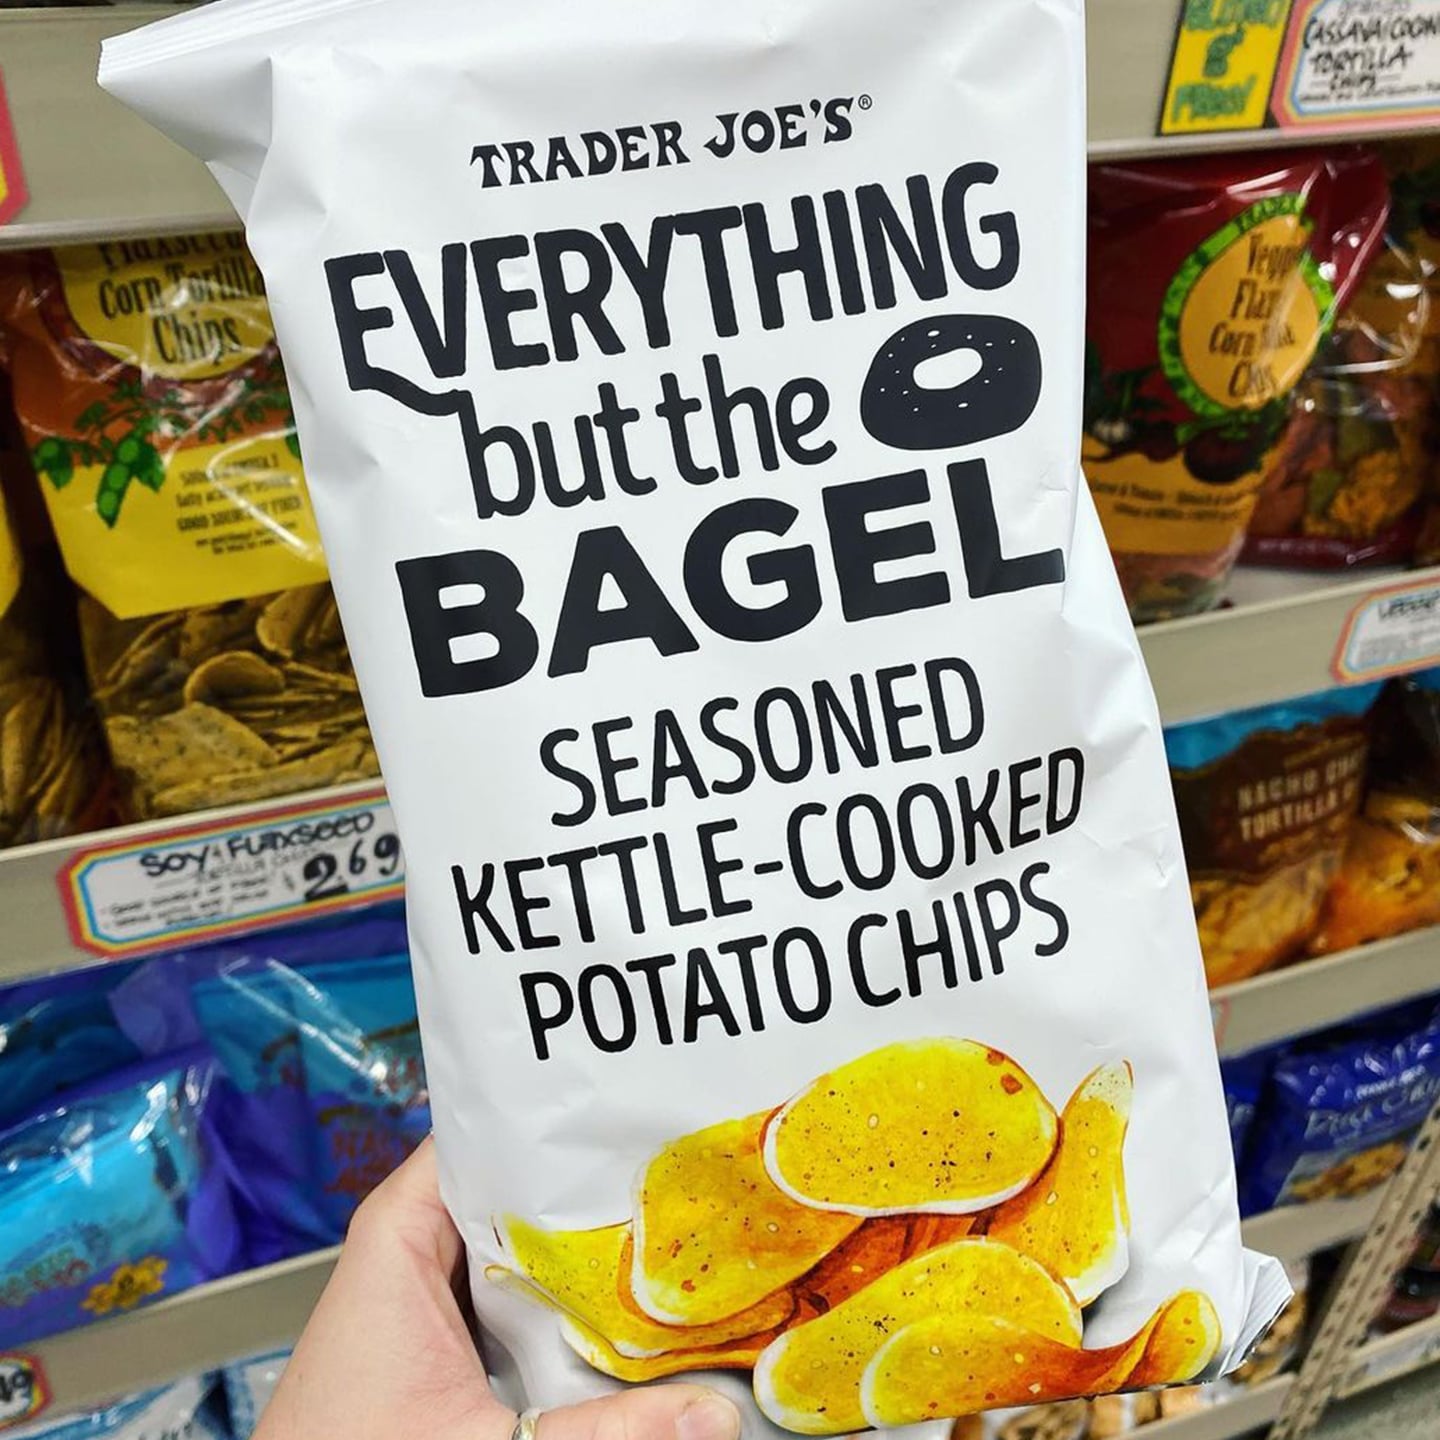 NEW Everything but the Elote Seasoning Blend Just $2.49 at Trader Joe's